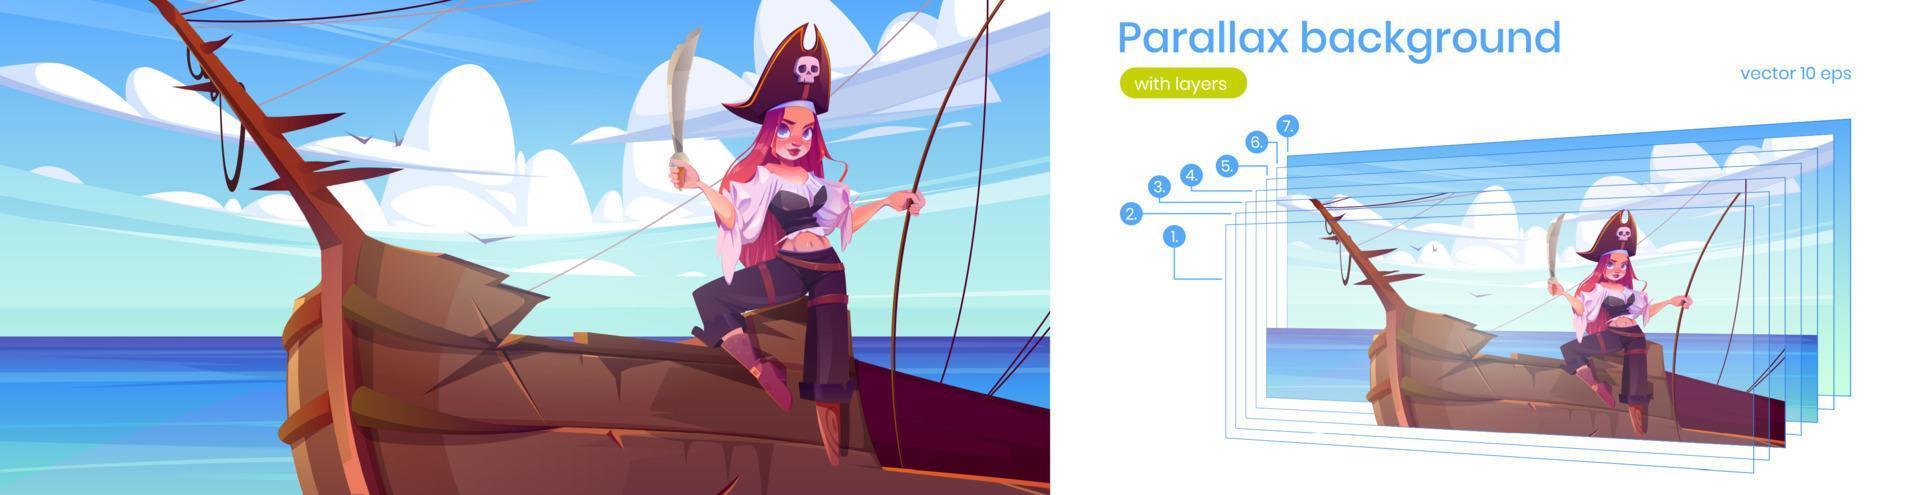 Parallax background with girl pirate on ship vector